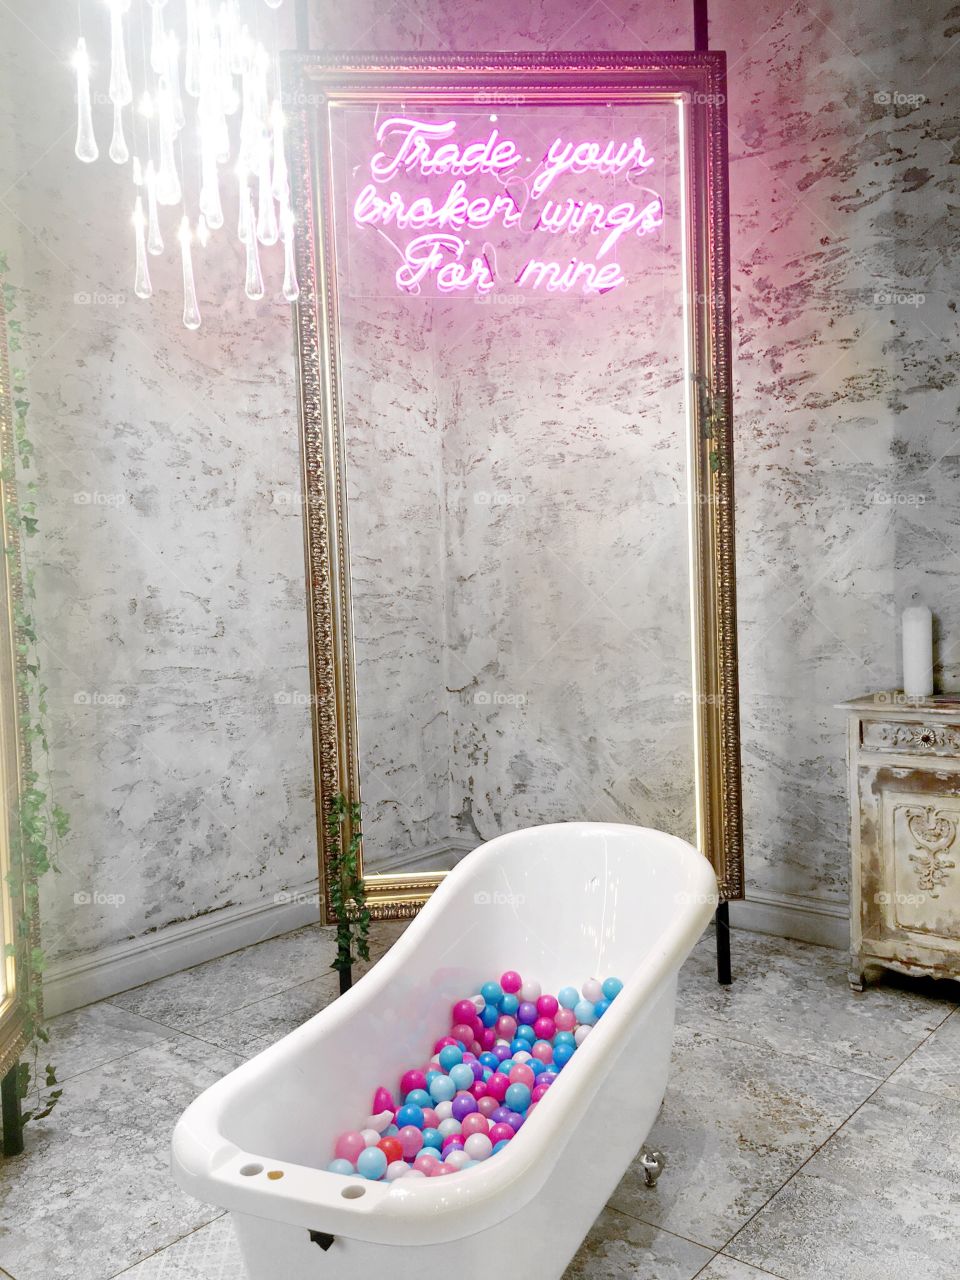 A bath bull of coloured balls, golden frame and pink neon lighting with an inspirational message “trade your broken wings for mine”